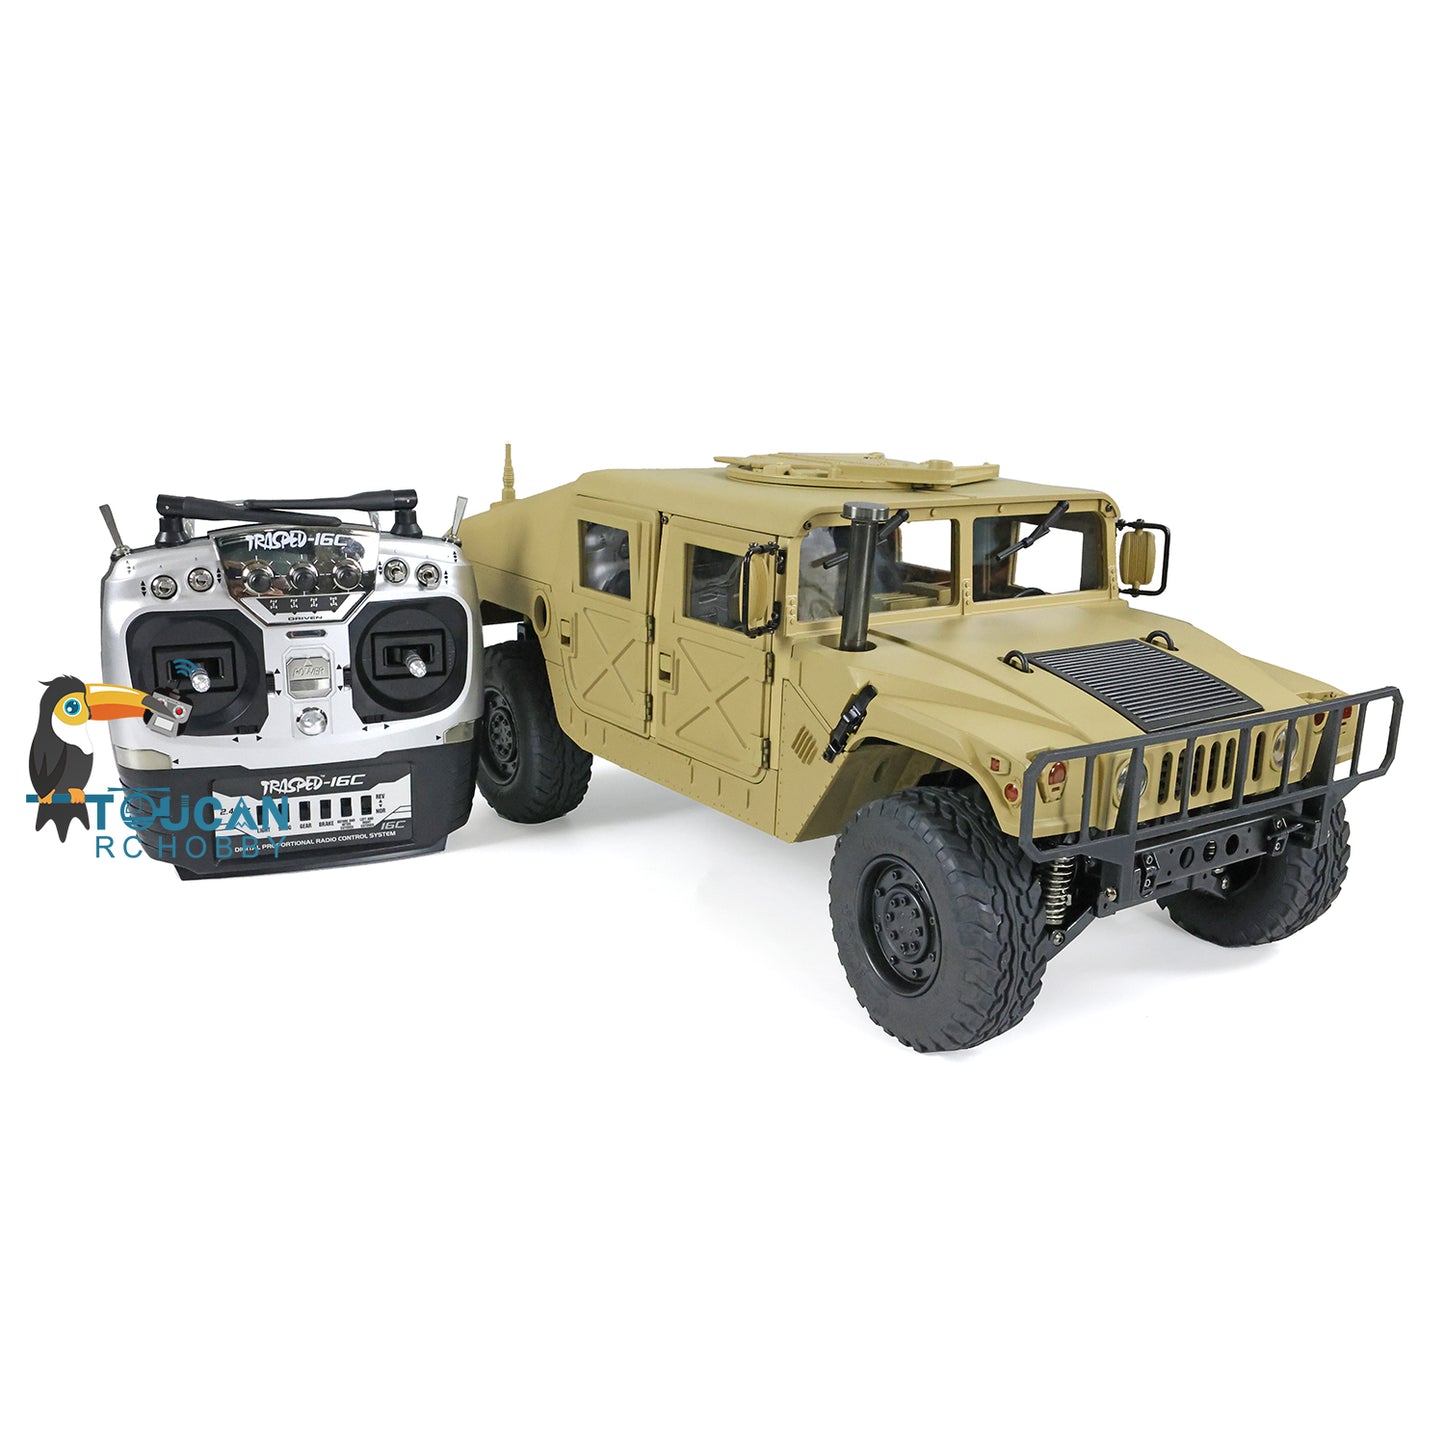 HG 1/10 RC Truck 4*4 U.S. Military Vehicle P408 Racing Car w/ Radio System Gearbox Remote Control Model Birthday Gift for Boys